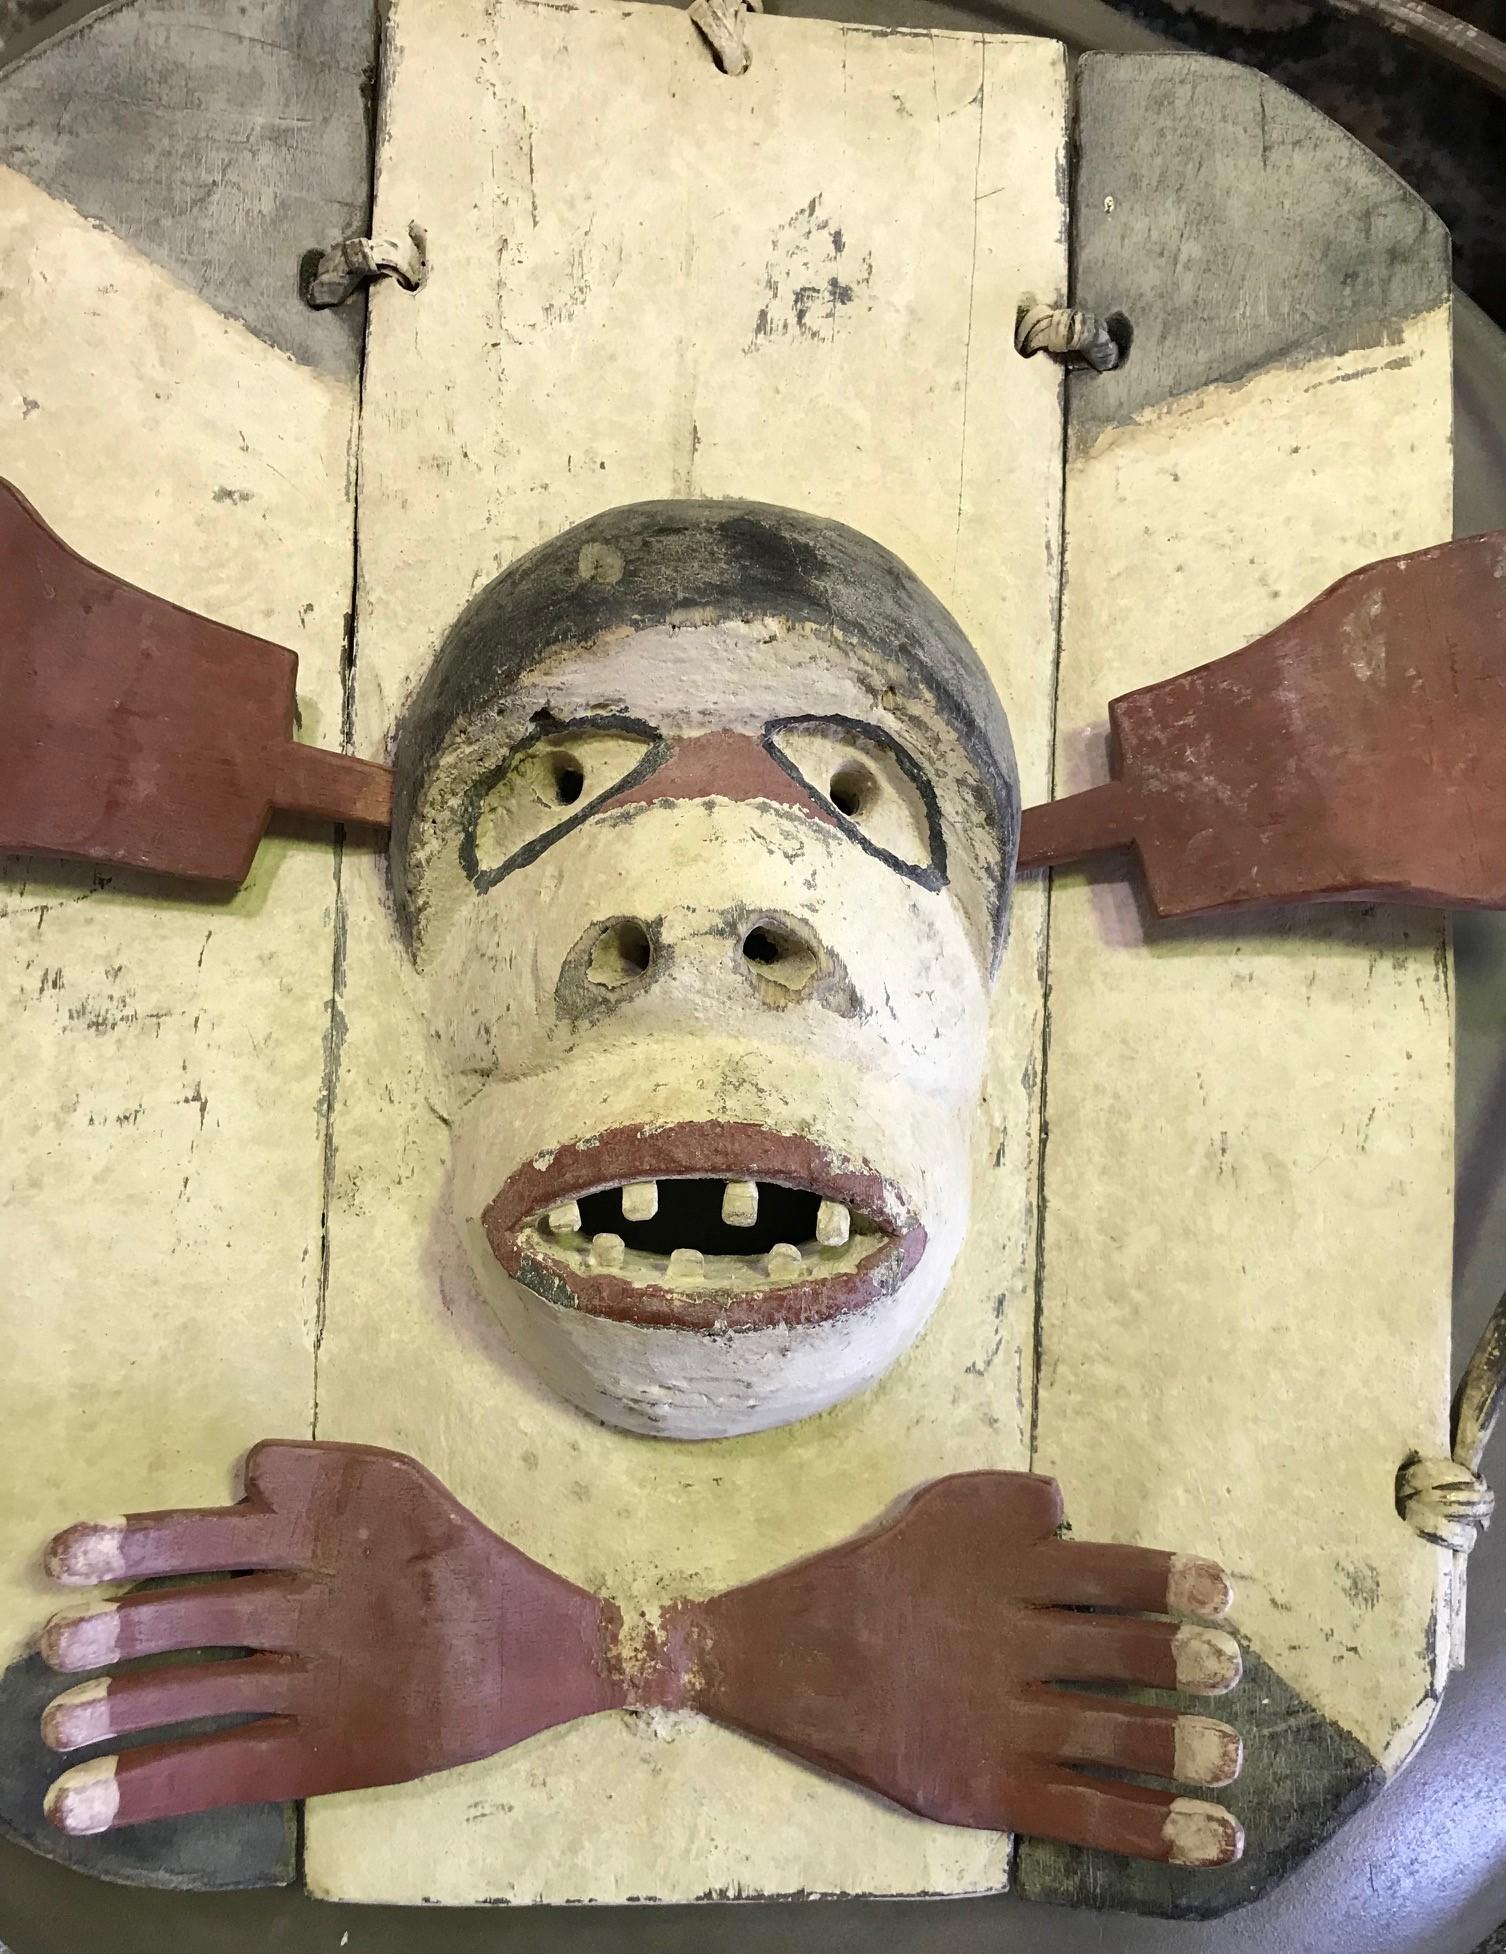 A truly fascinating mask by the Yup'ik (Yupik) aboriginal, indigenous people of South-Western & South Central Alaska. The Yup'ik people, who are related to the Inuit peoples, have a long history of ceremonial mask making. Yup'ik masks were